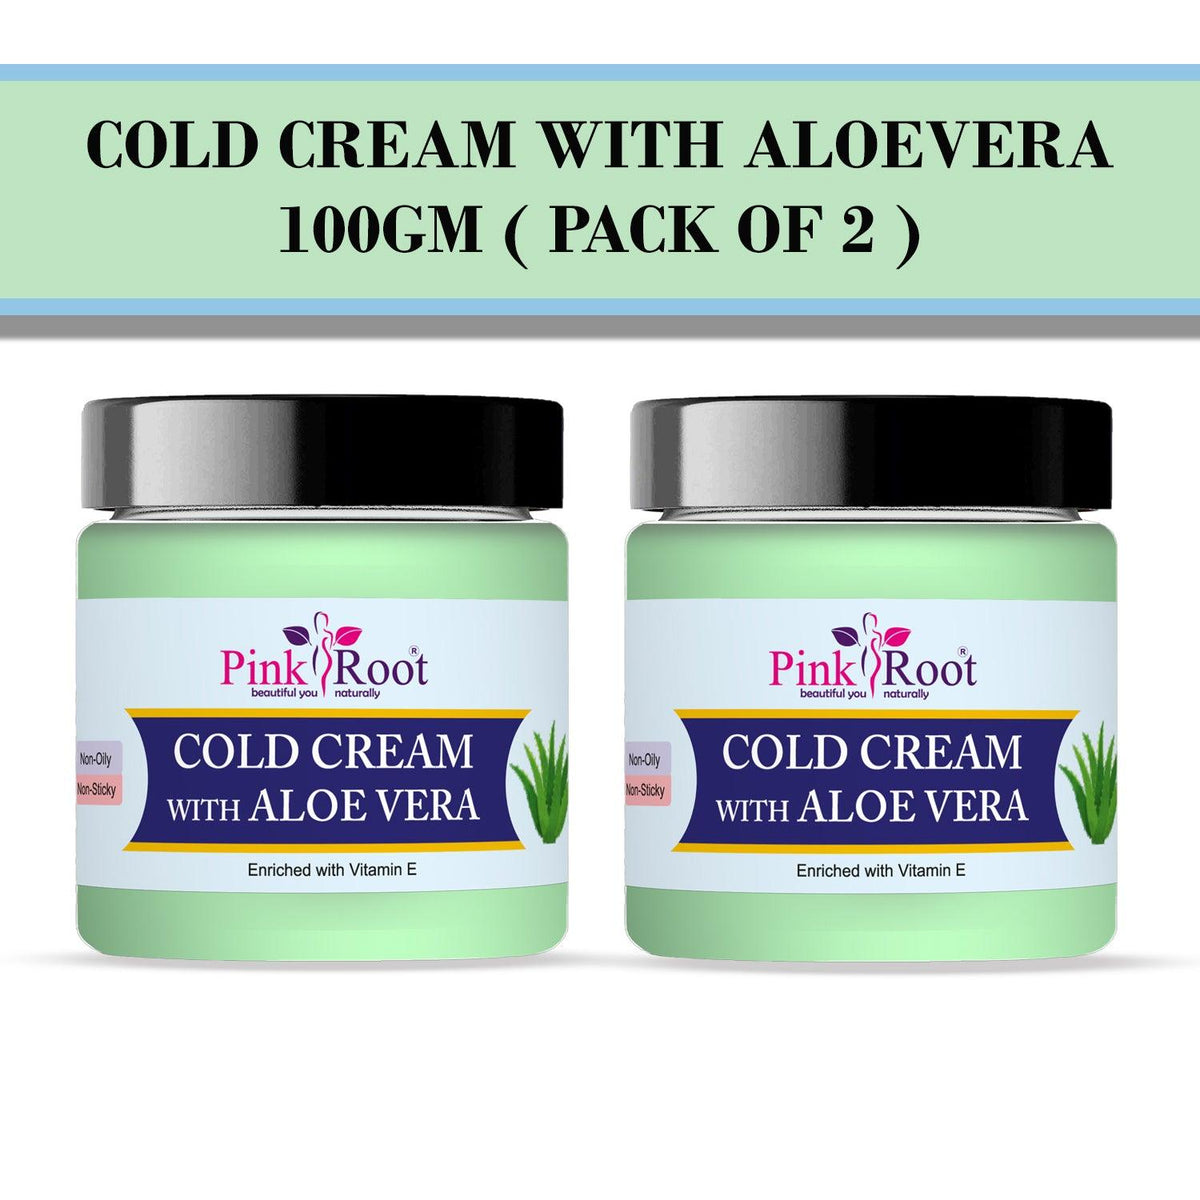 Cold Cream with Aloevera 100gm ( Pack of 2 ) - Pink Root